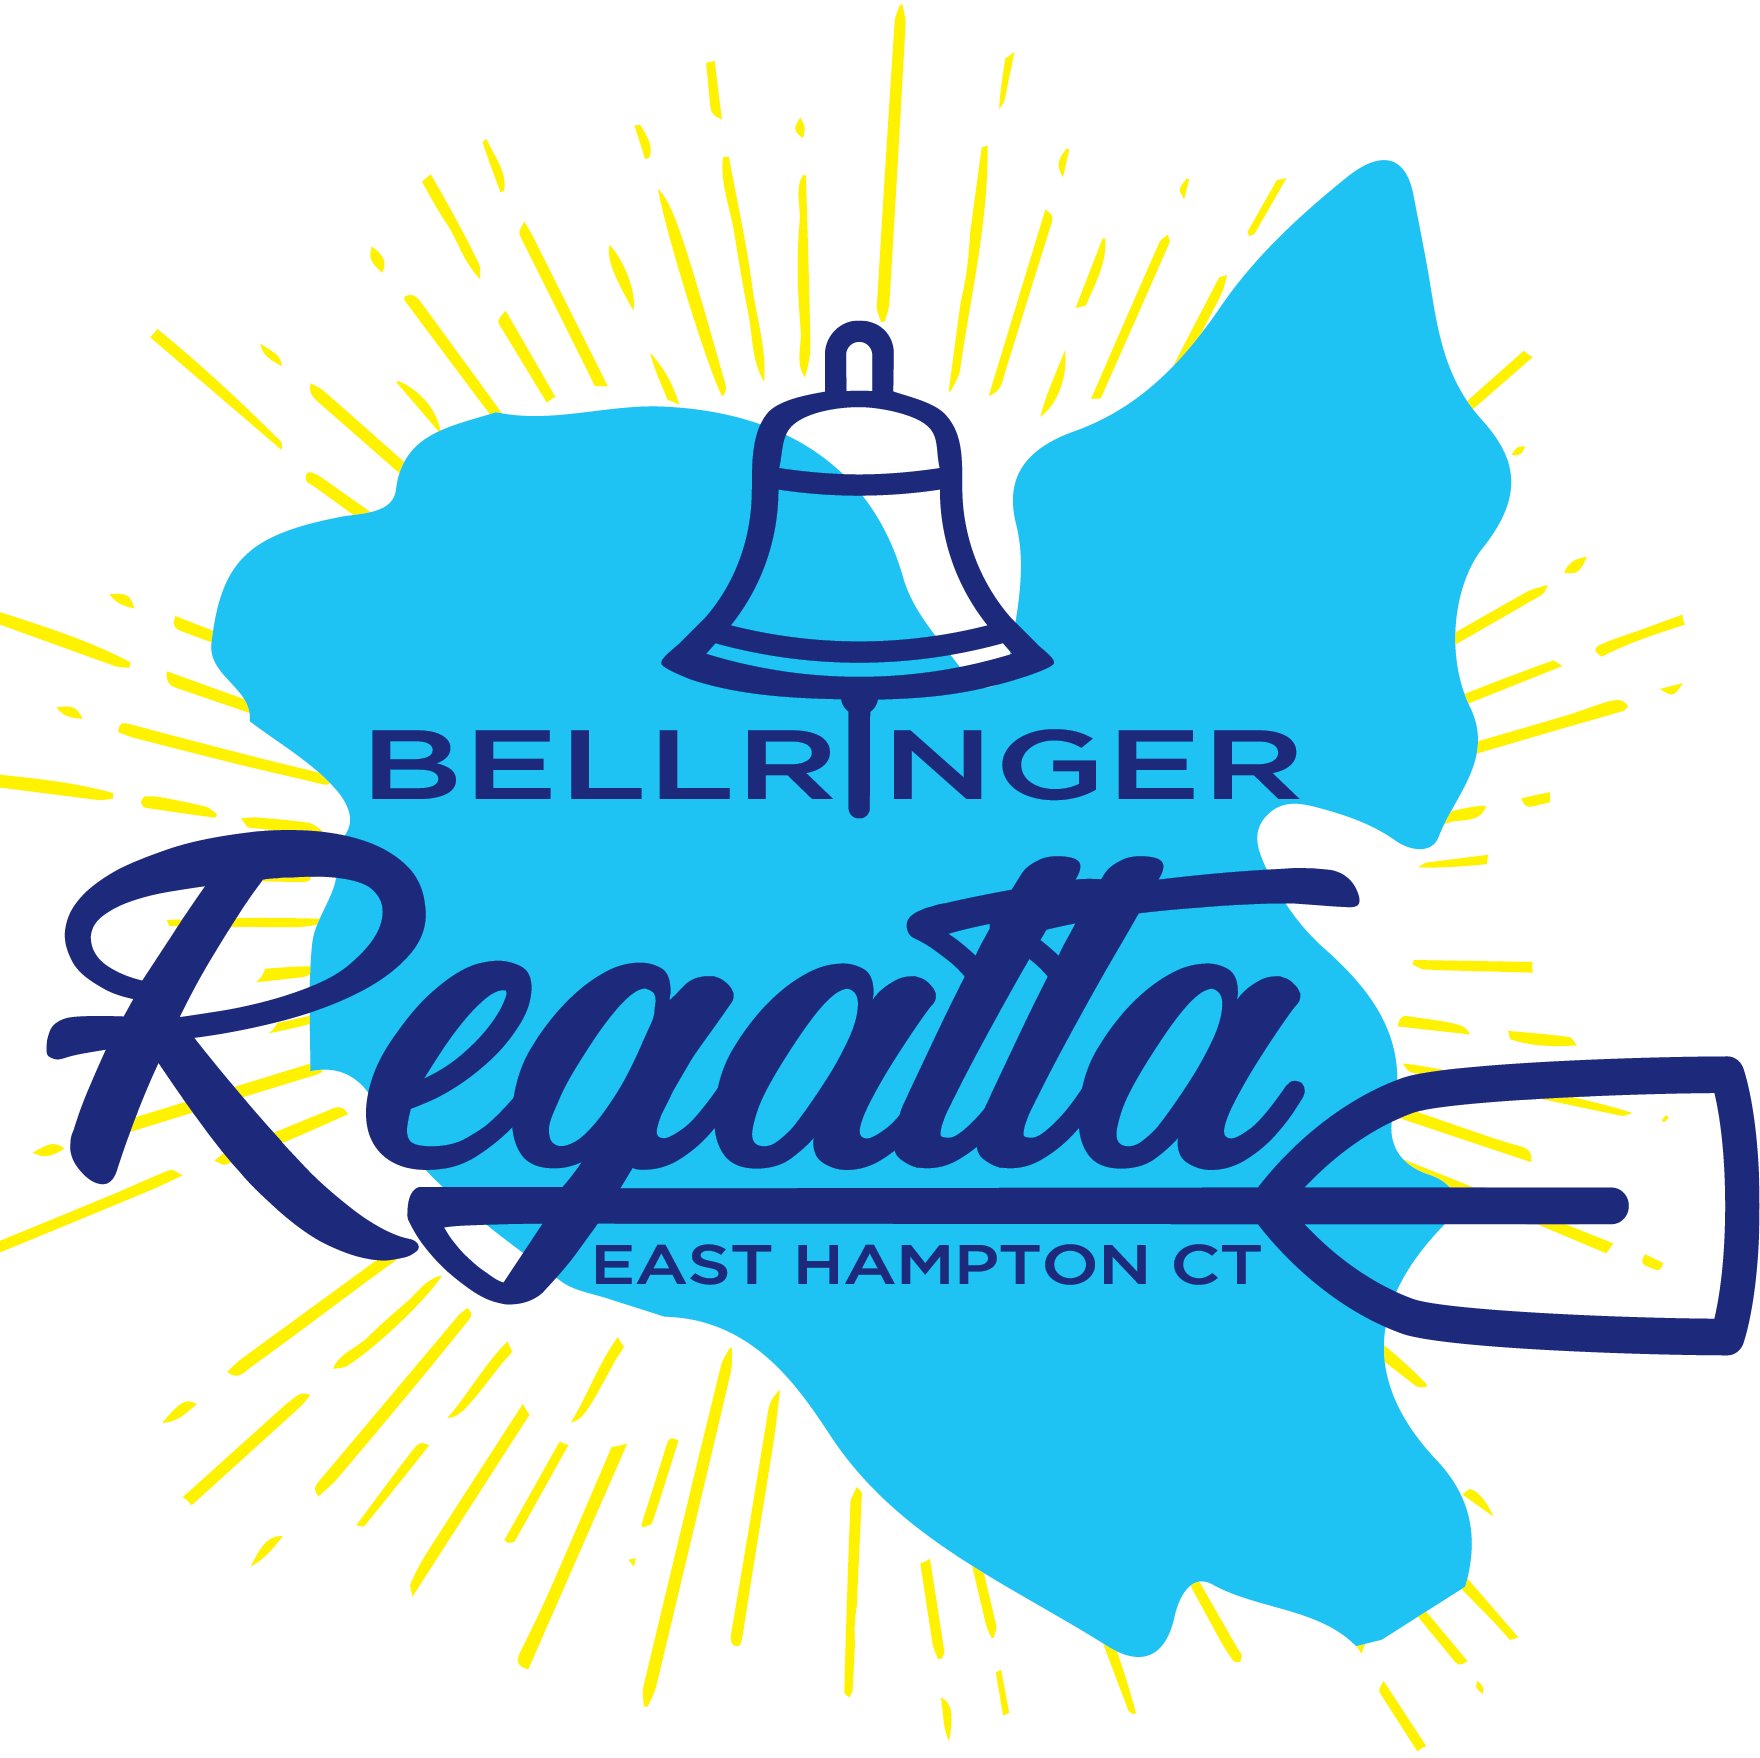 The Friends of East Hampton Rowing club is the proud  host the first annual Bellringer Regatta on Lake Pocotopaug in East Hampton CT!